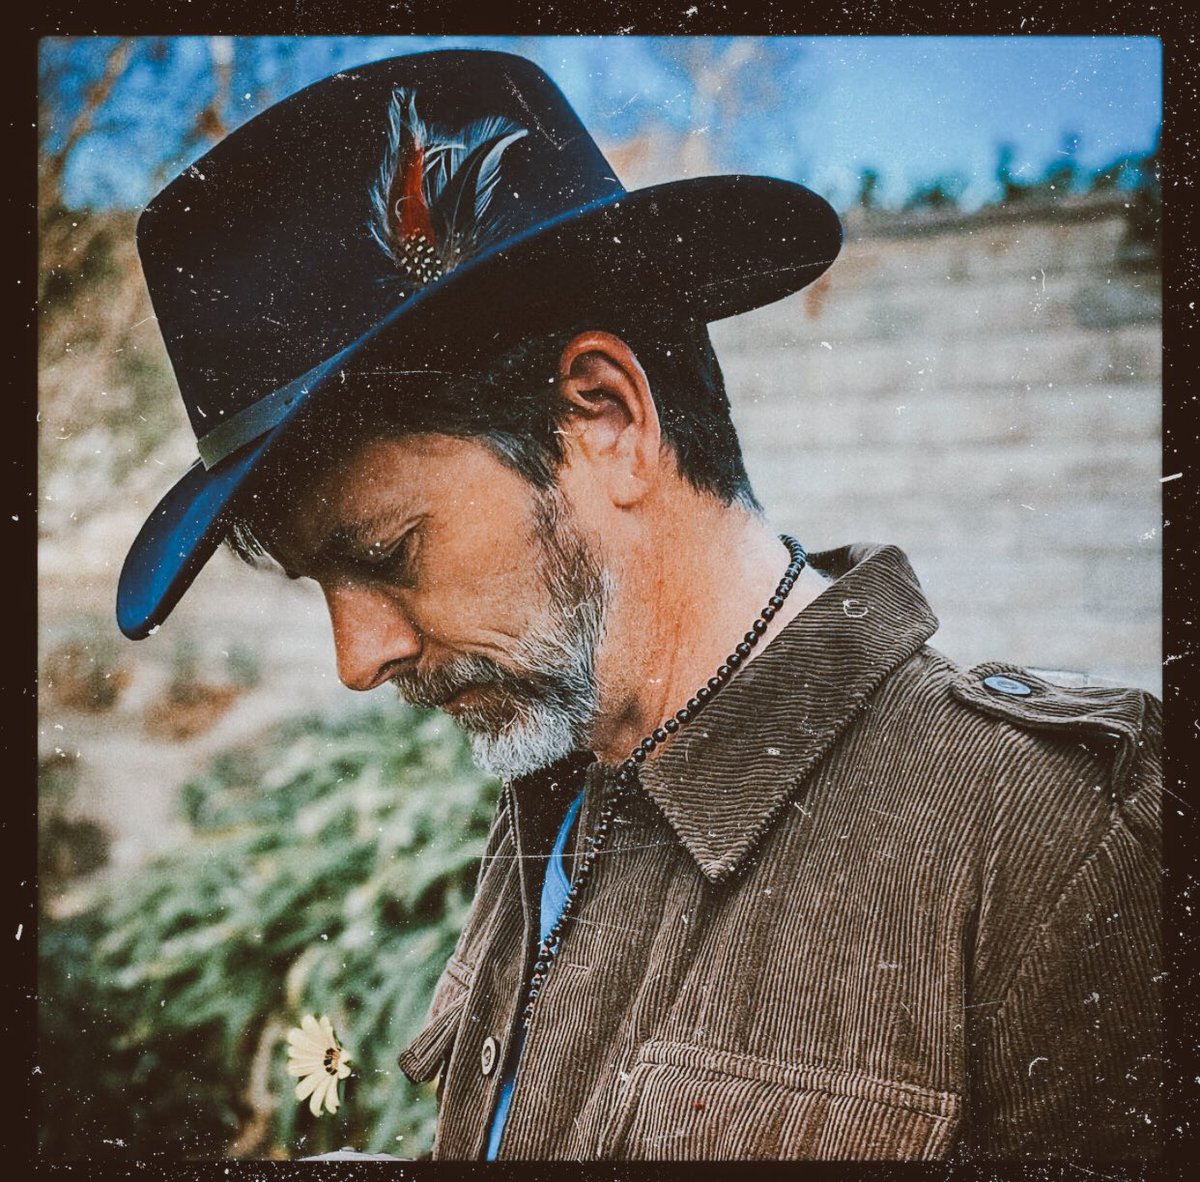 #JohnTagueFans!!! Hiiiiii!! Hope everyone is celebrating life and keeping the positive vibes active!
This pic though! 😱 I love hats and this is just epic! Follow @johnjtague on Instagram!!
Glad to be back! How’s everyone? #JohnTague #thejohntagueshow #Welcome2021